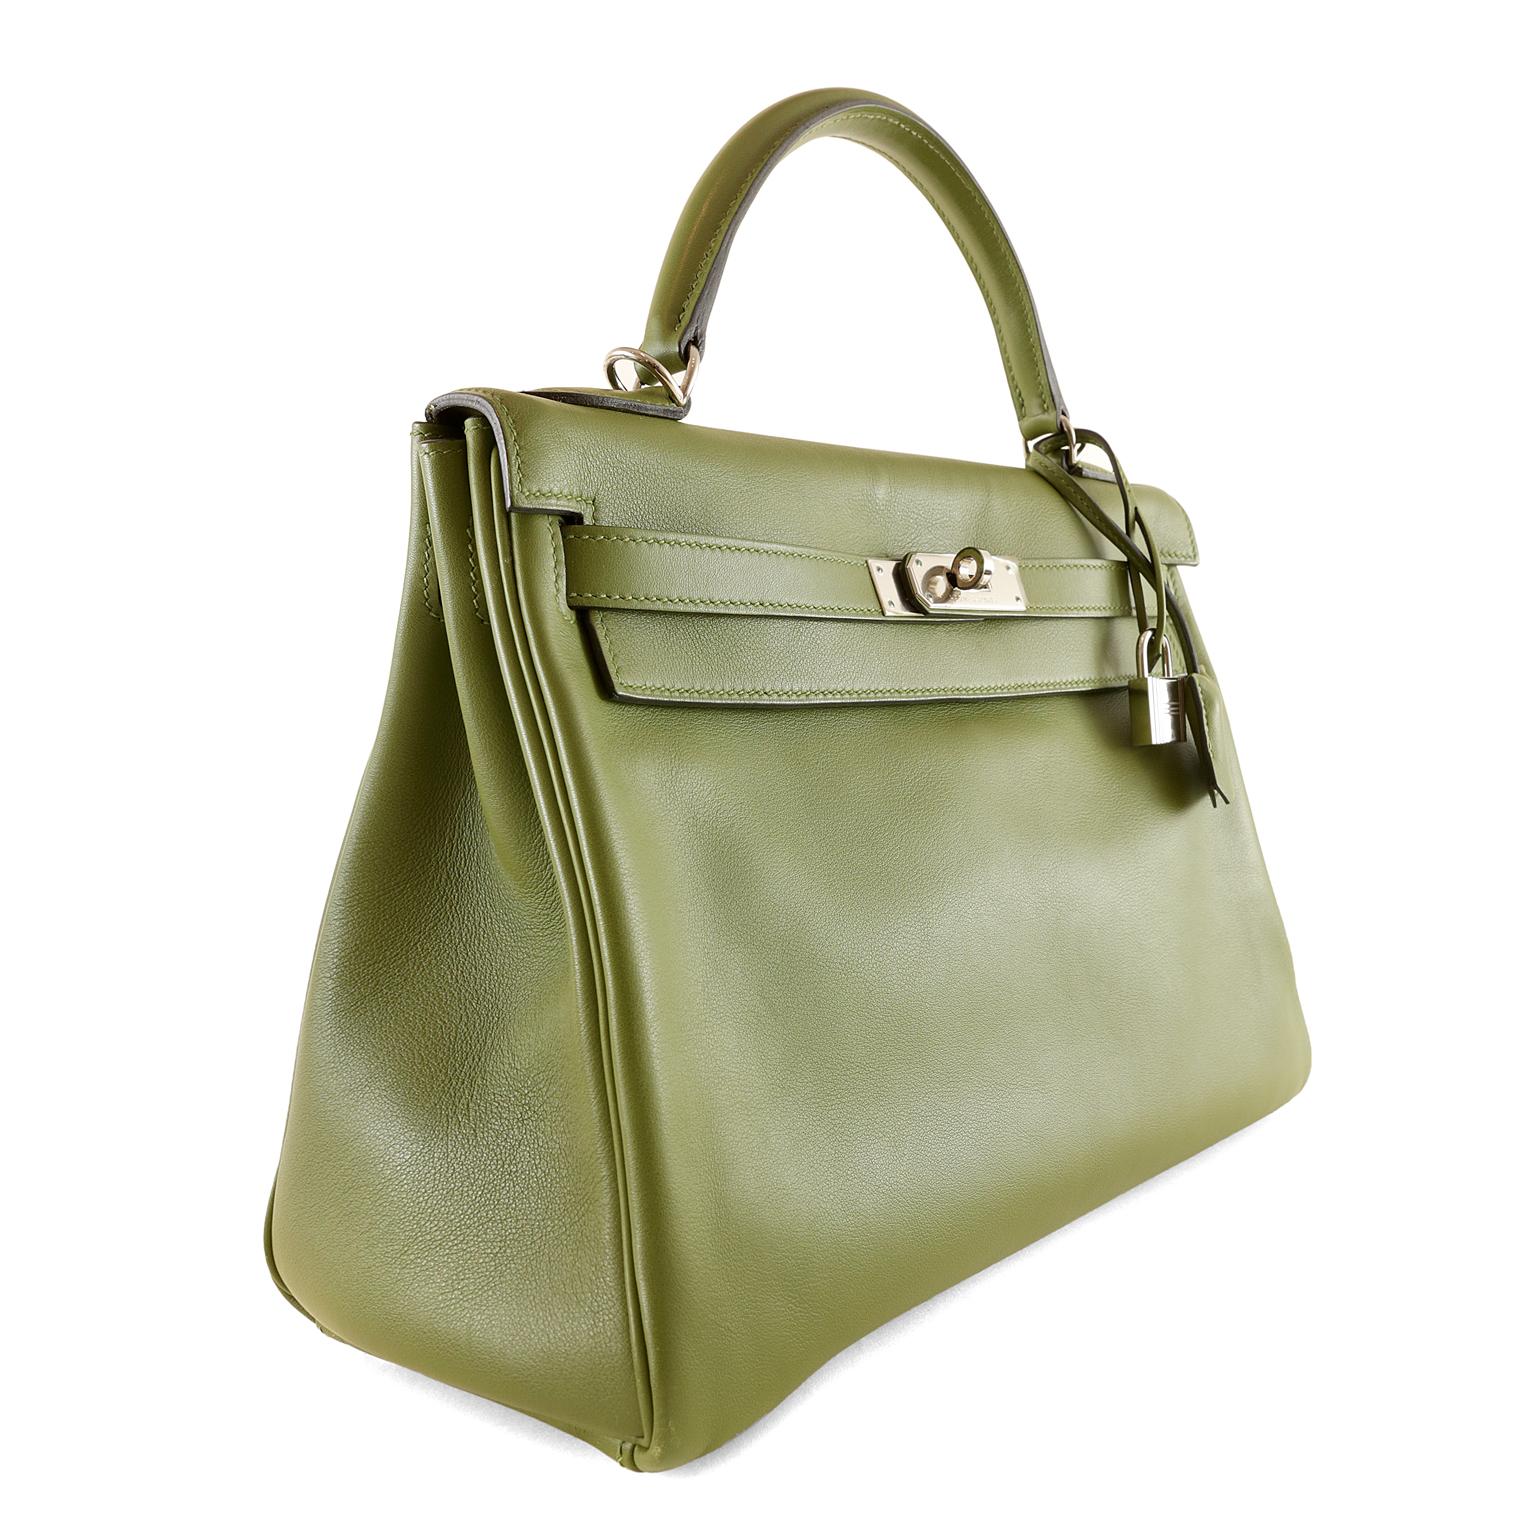 Hermès Vert Anis Swift Leather 32 cm Kelly- pristine condition with the protective plastic still intact on much of the hardware
 Hermès bags are considered the ultimate luxury item worldwide.  Each piece is handcrafted with waitlists that can exceed